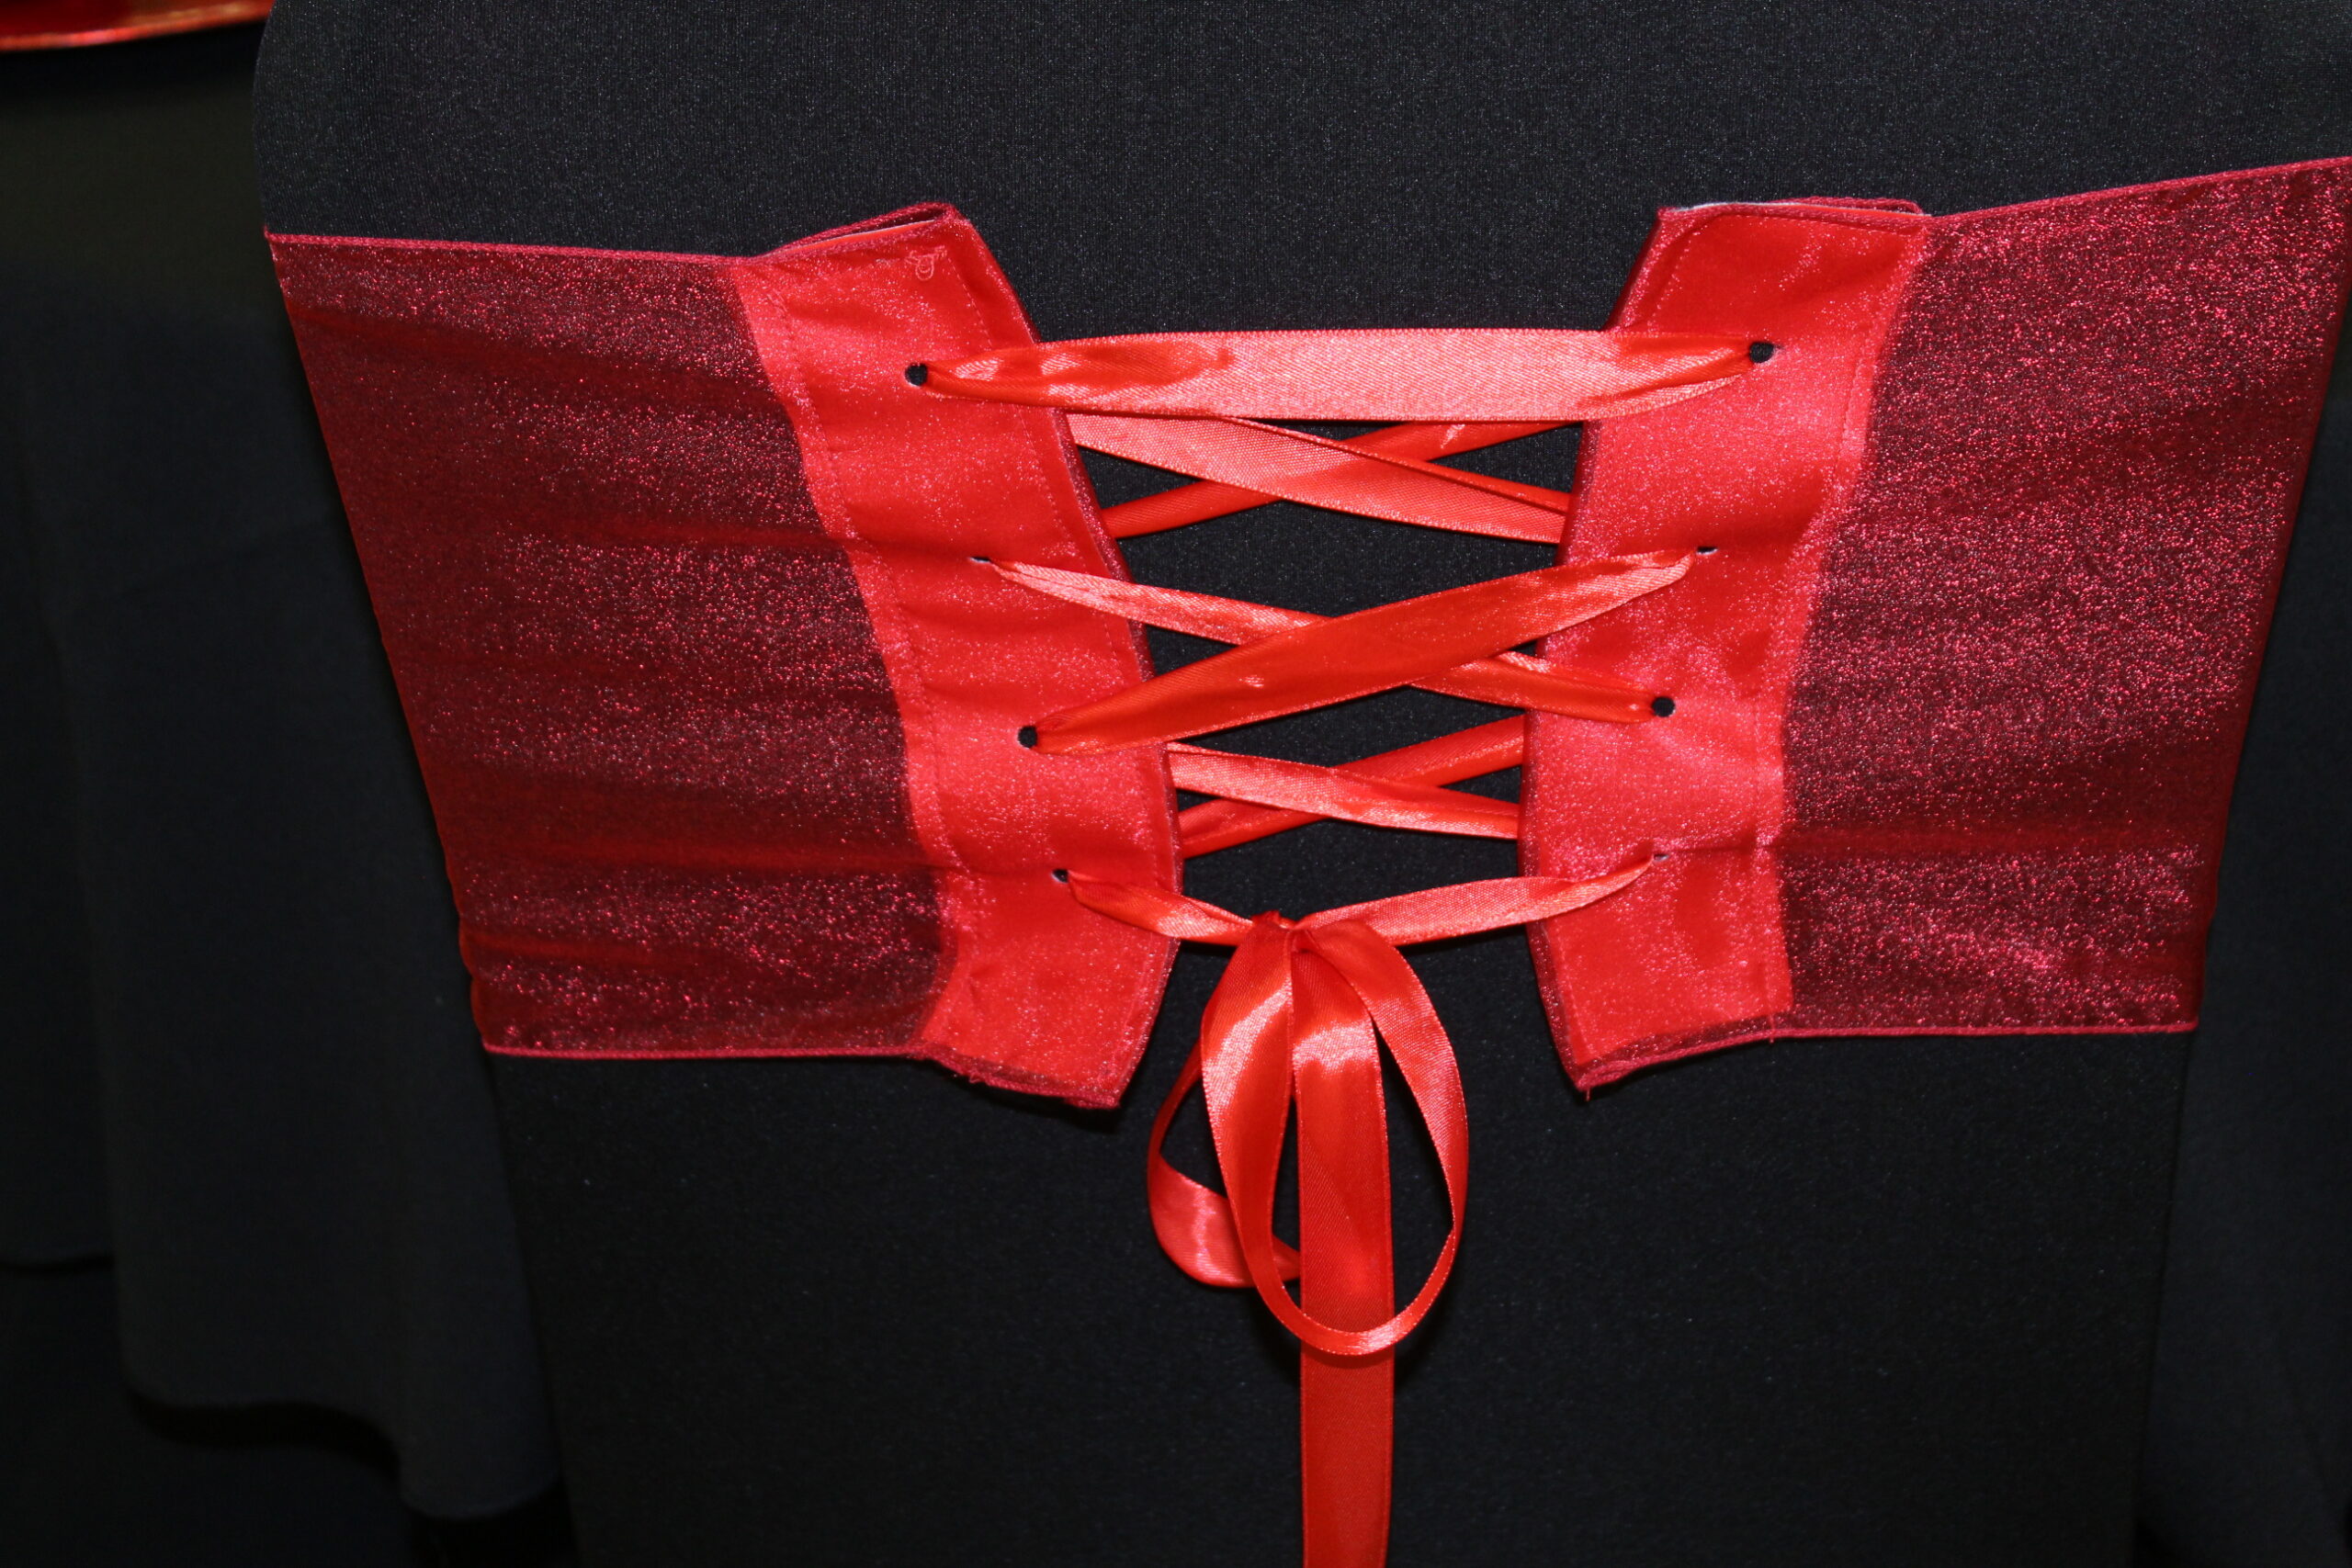 Red corset style sash on black chair cover